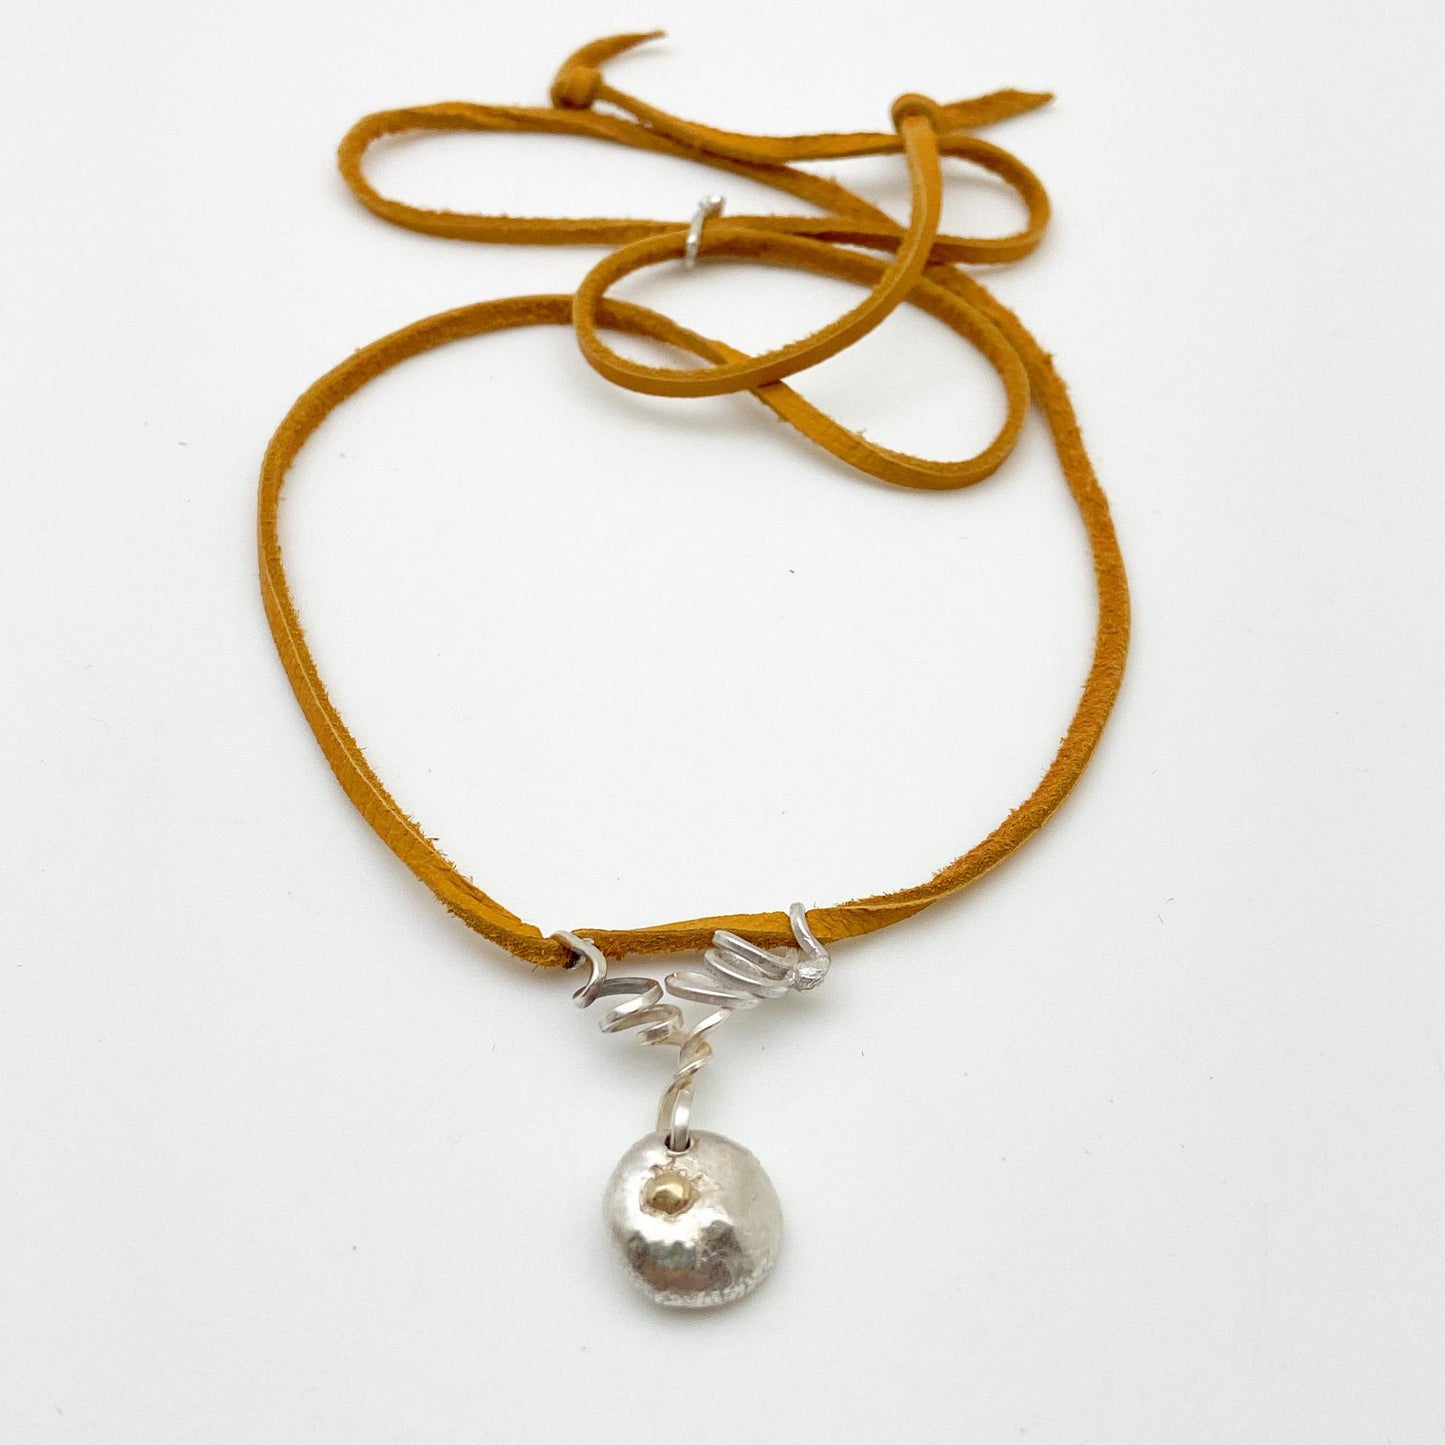 Necklace - "Molten" Sterling Dollop with 14kt Gold Accent on Leather